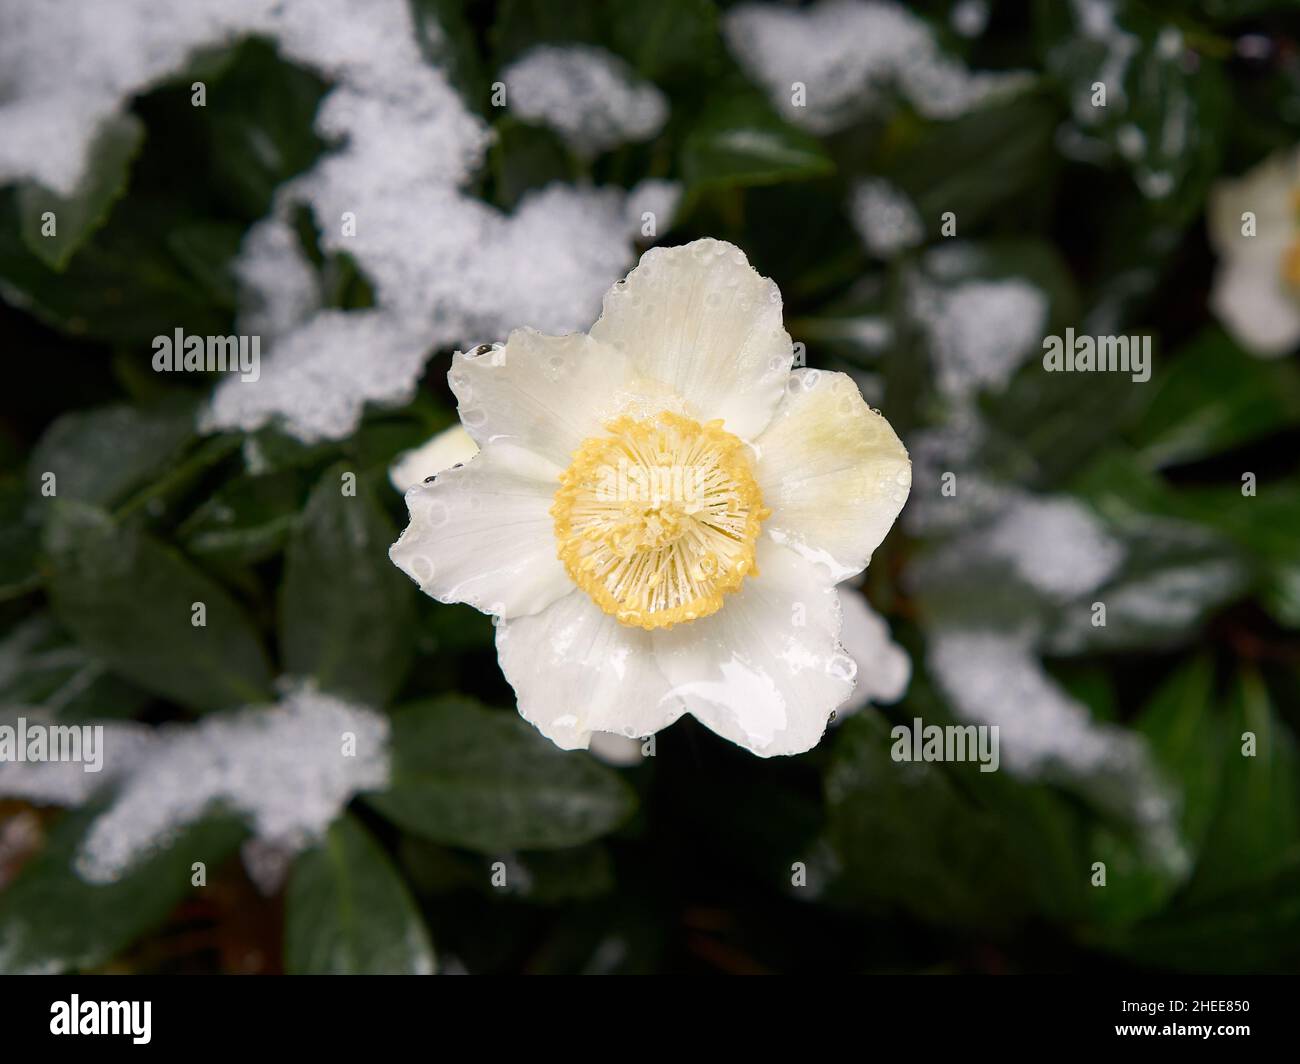 Close-up of a white and yellow winter rose or Christmas Rose with patches of snow on the leaves                               - Stock Photo